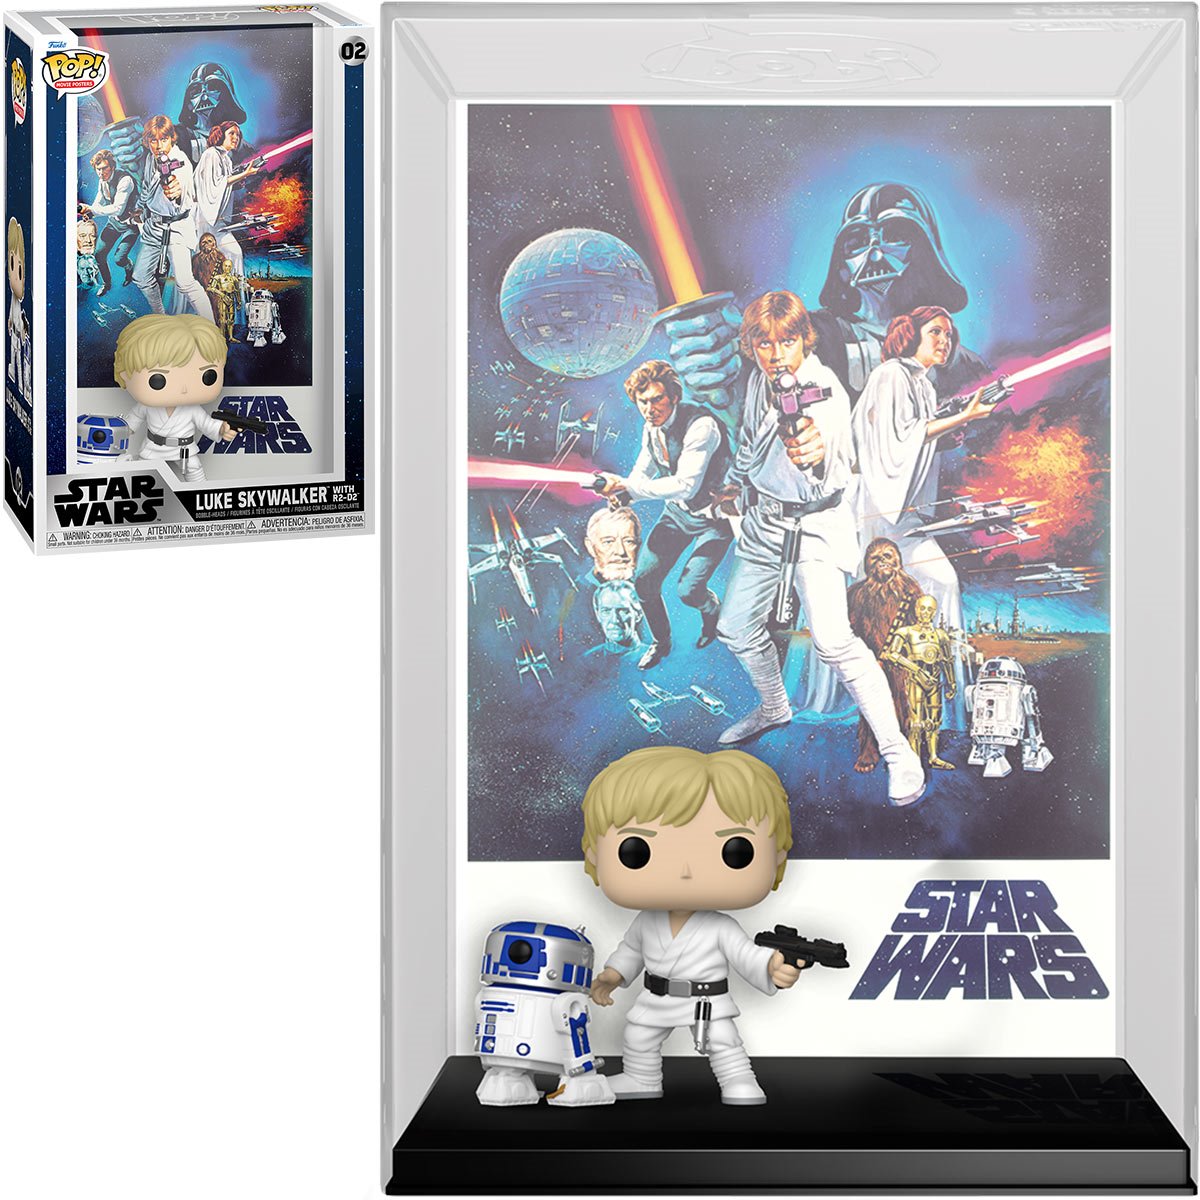 Star Wars: Episode - A New Hope Pop! Movie Poster Figure with Case